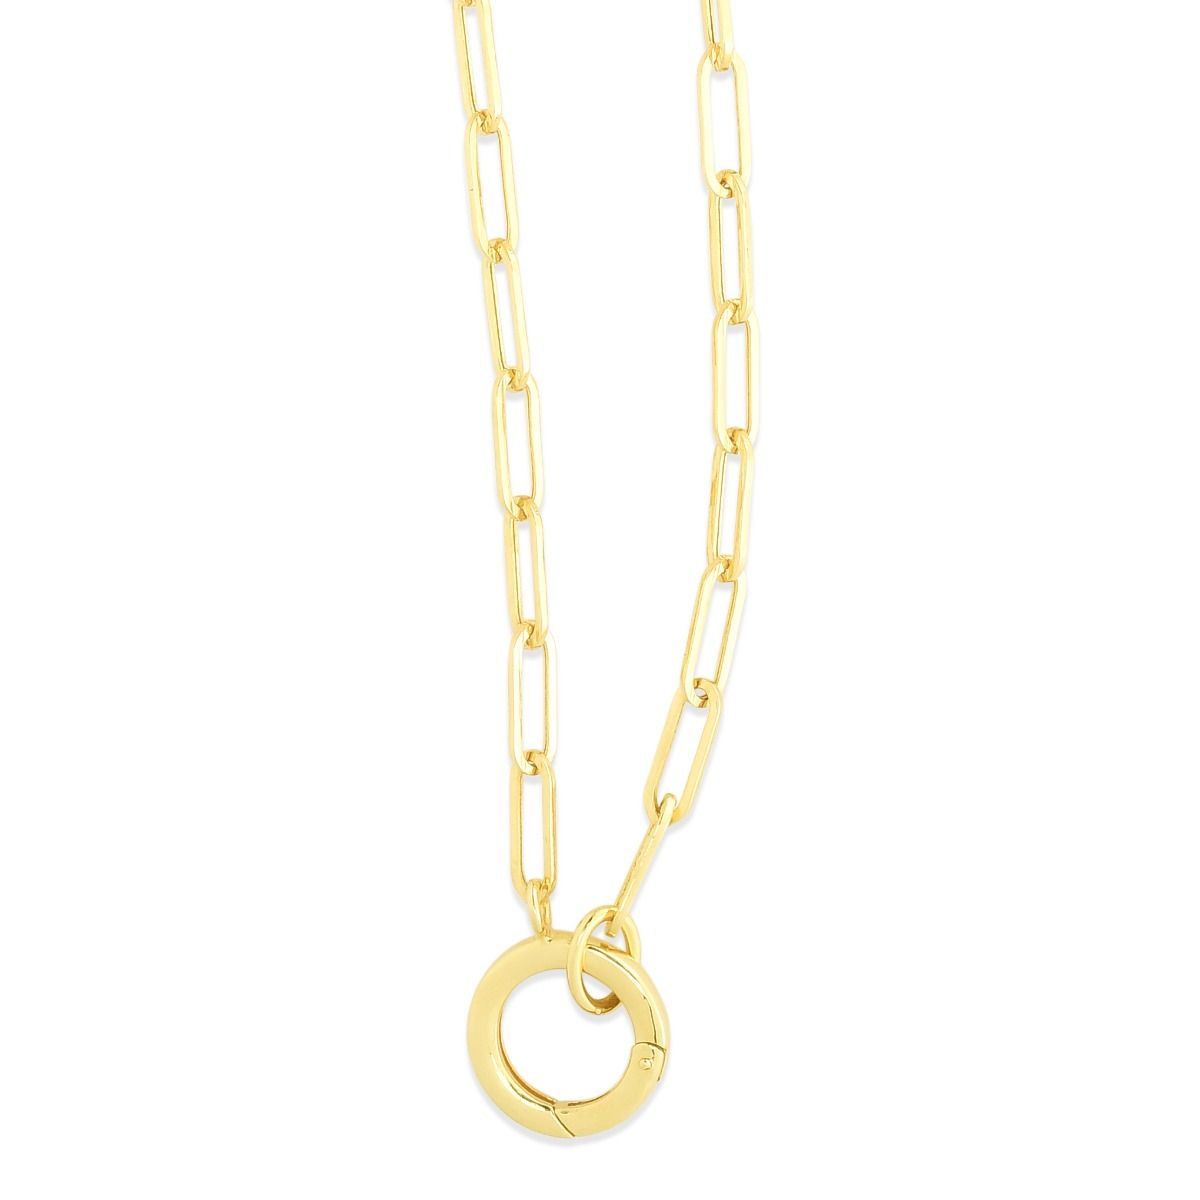 14k yellow gold charm clasp paperclip necklace